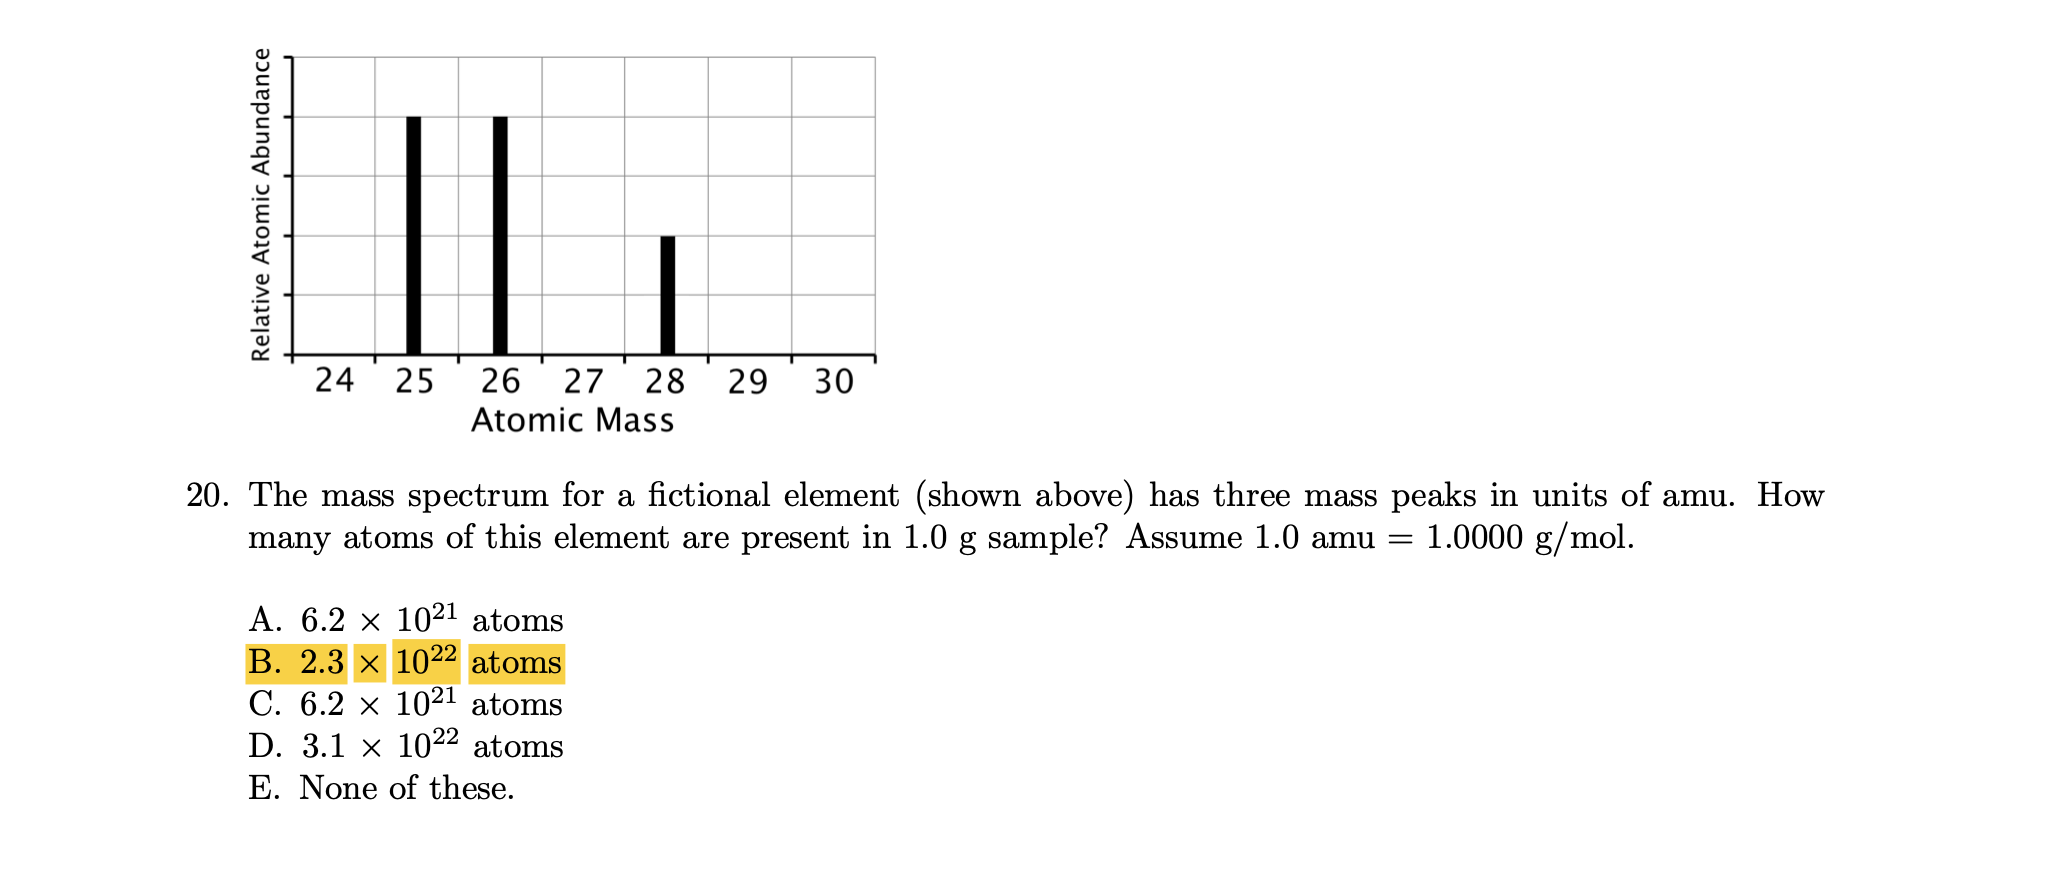 24
25
26
27
28
29
30
Atomic Mass
20. The mass spectrum for a fictional element (shown above) has three mass peaks in units of amu. How
many atoms of this element are present in 1.0 g sample? Assume 1.0 amu = 1.0000 g/mol.
A. 6.2 x 1021 atoms
B. 2.3 x 1022 atoms
C. 6.2 x 1021 atoms
D. 3.1 x 1022 atoms
E. None of these.
Relative Atomic Abundance
